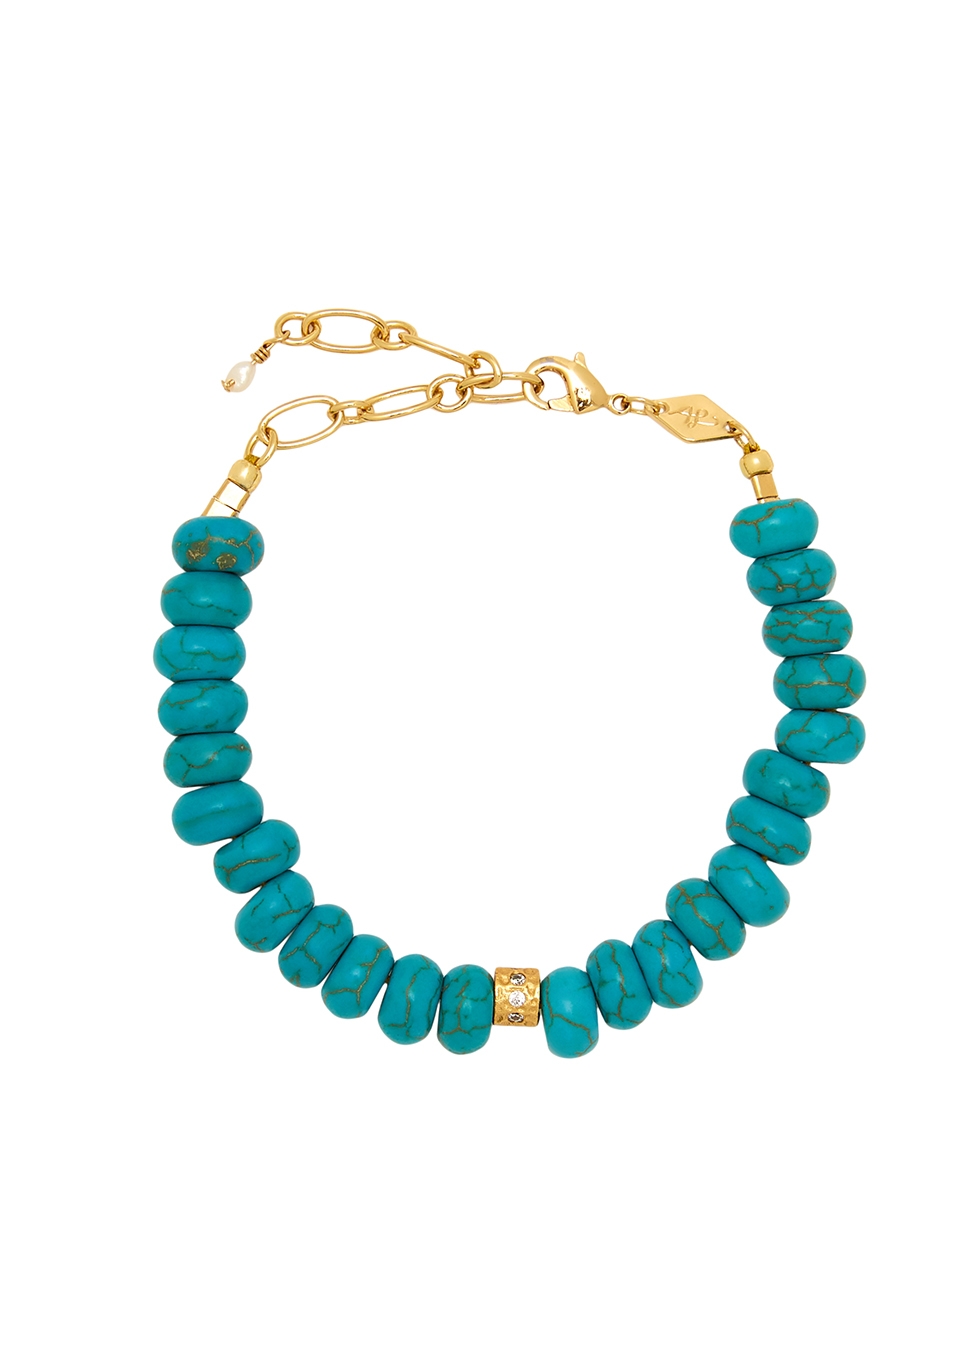 Anni Lu Pacifico 18kt Gold-plated Beaded Bracelet In Turquoise